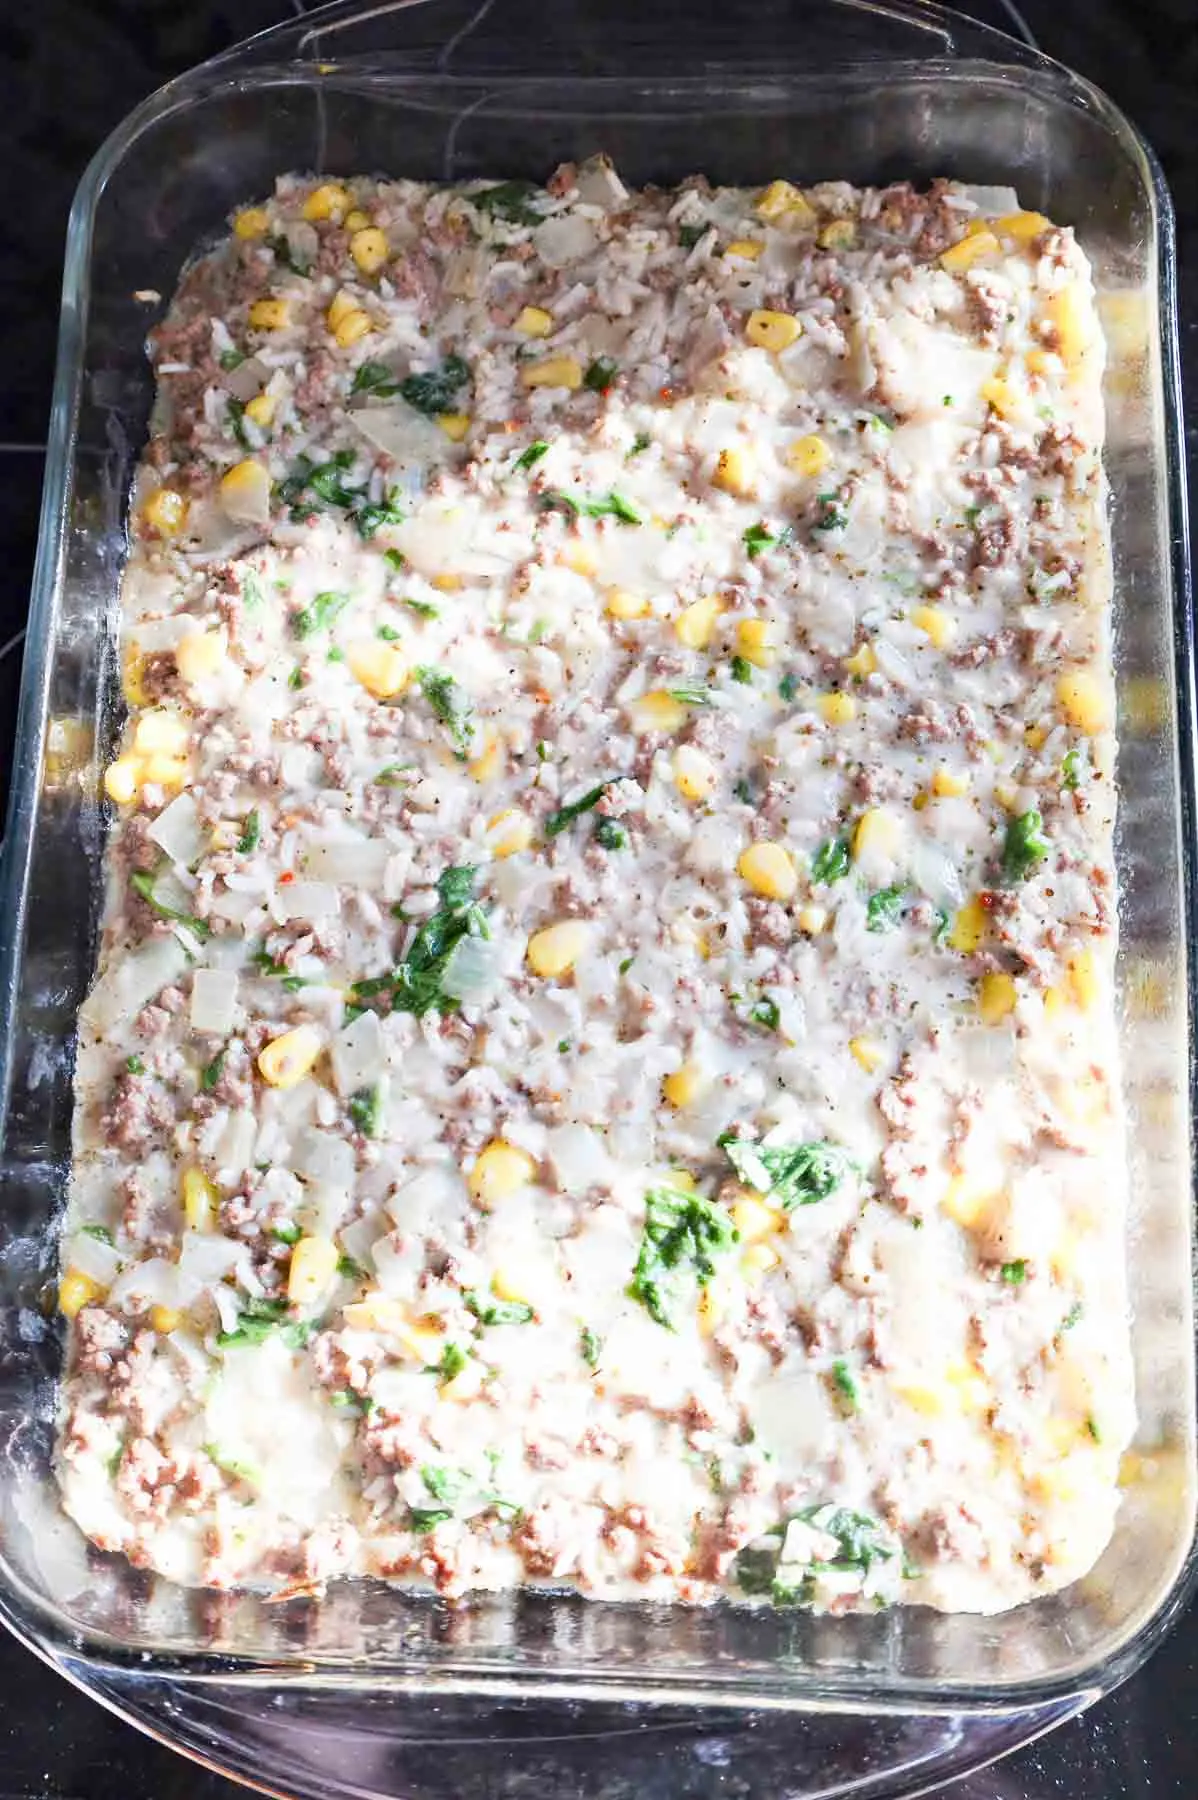 ground beef, rice and veggie mixture in a baking dish